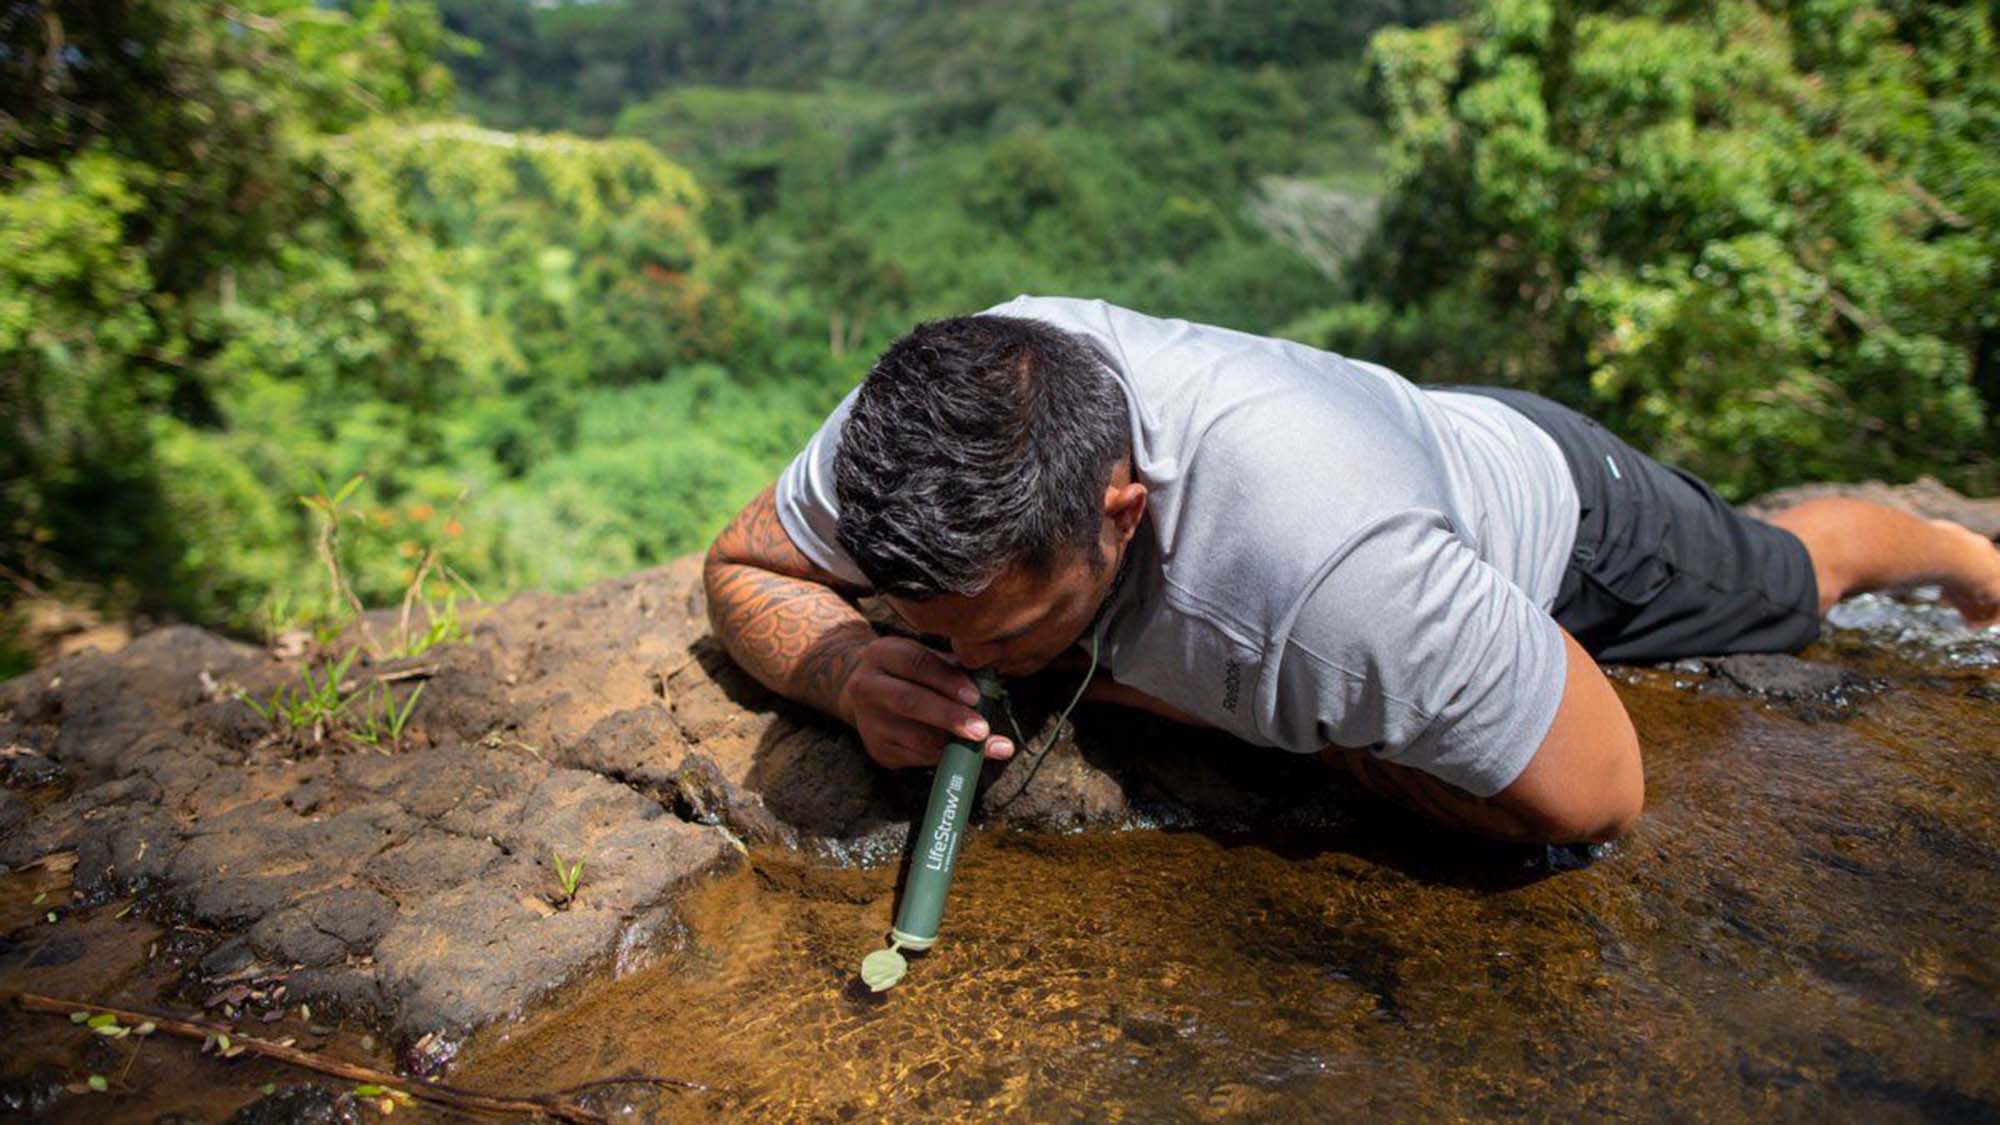 Lifestraw Go Series Review: The Simplest Way to Drink Tap Water Anywhere